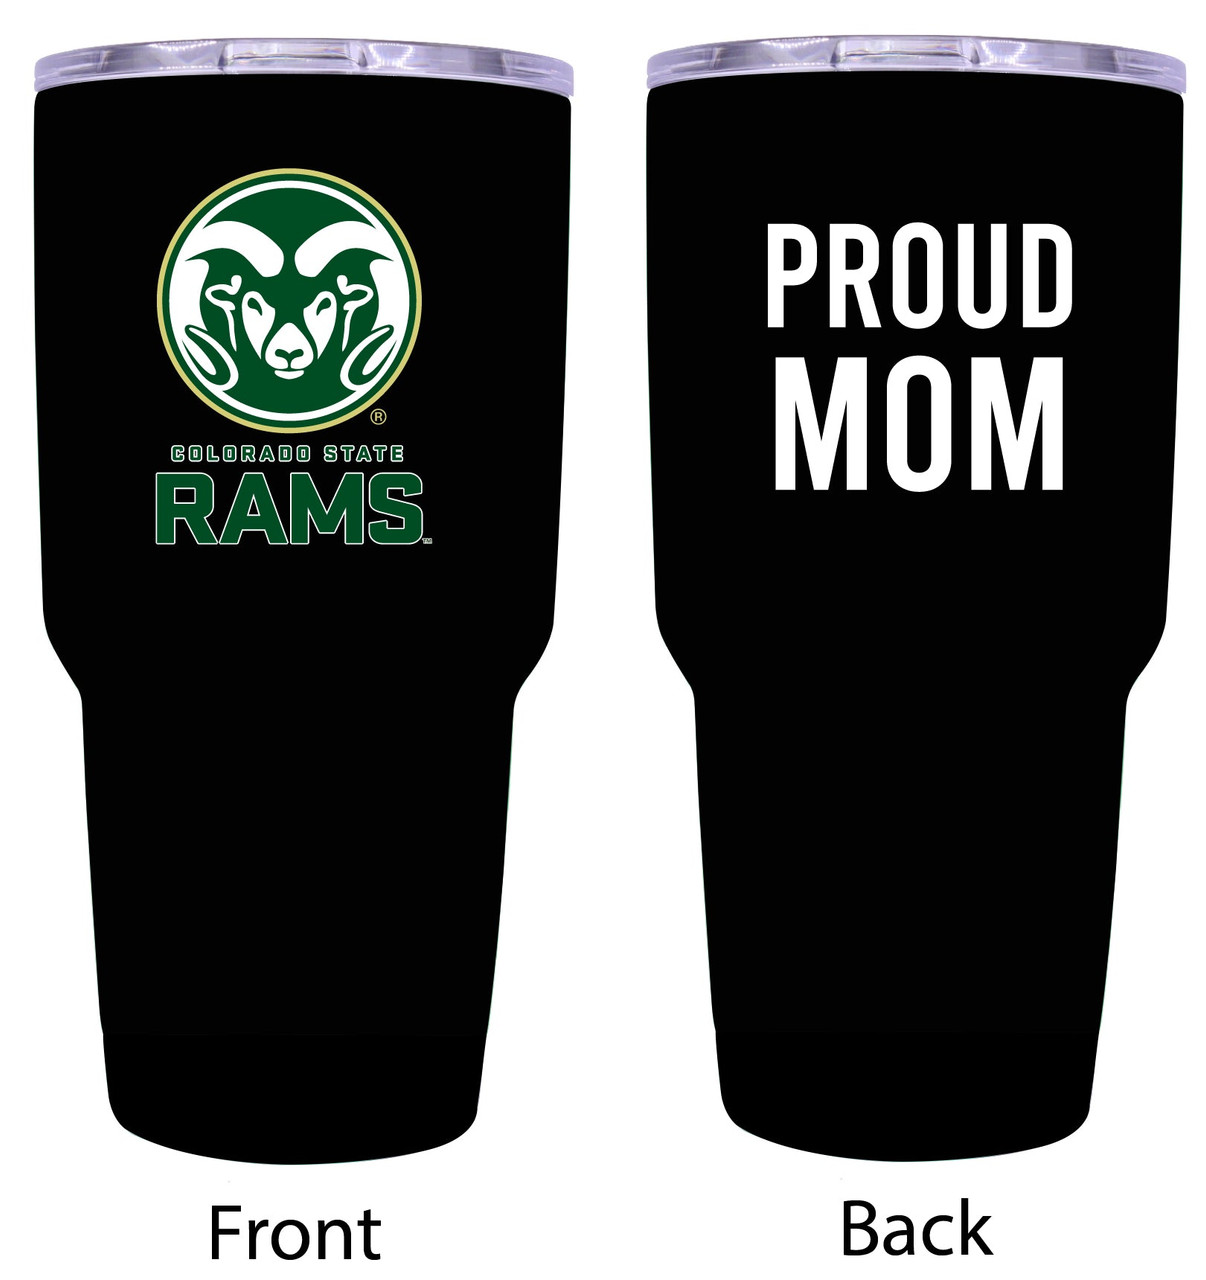 Colorado State Rams Proud Mom 24 oz Insulated Stainless Steel Tumblers Choose Your Color.